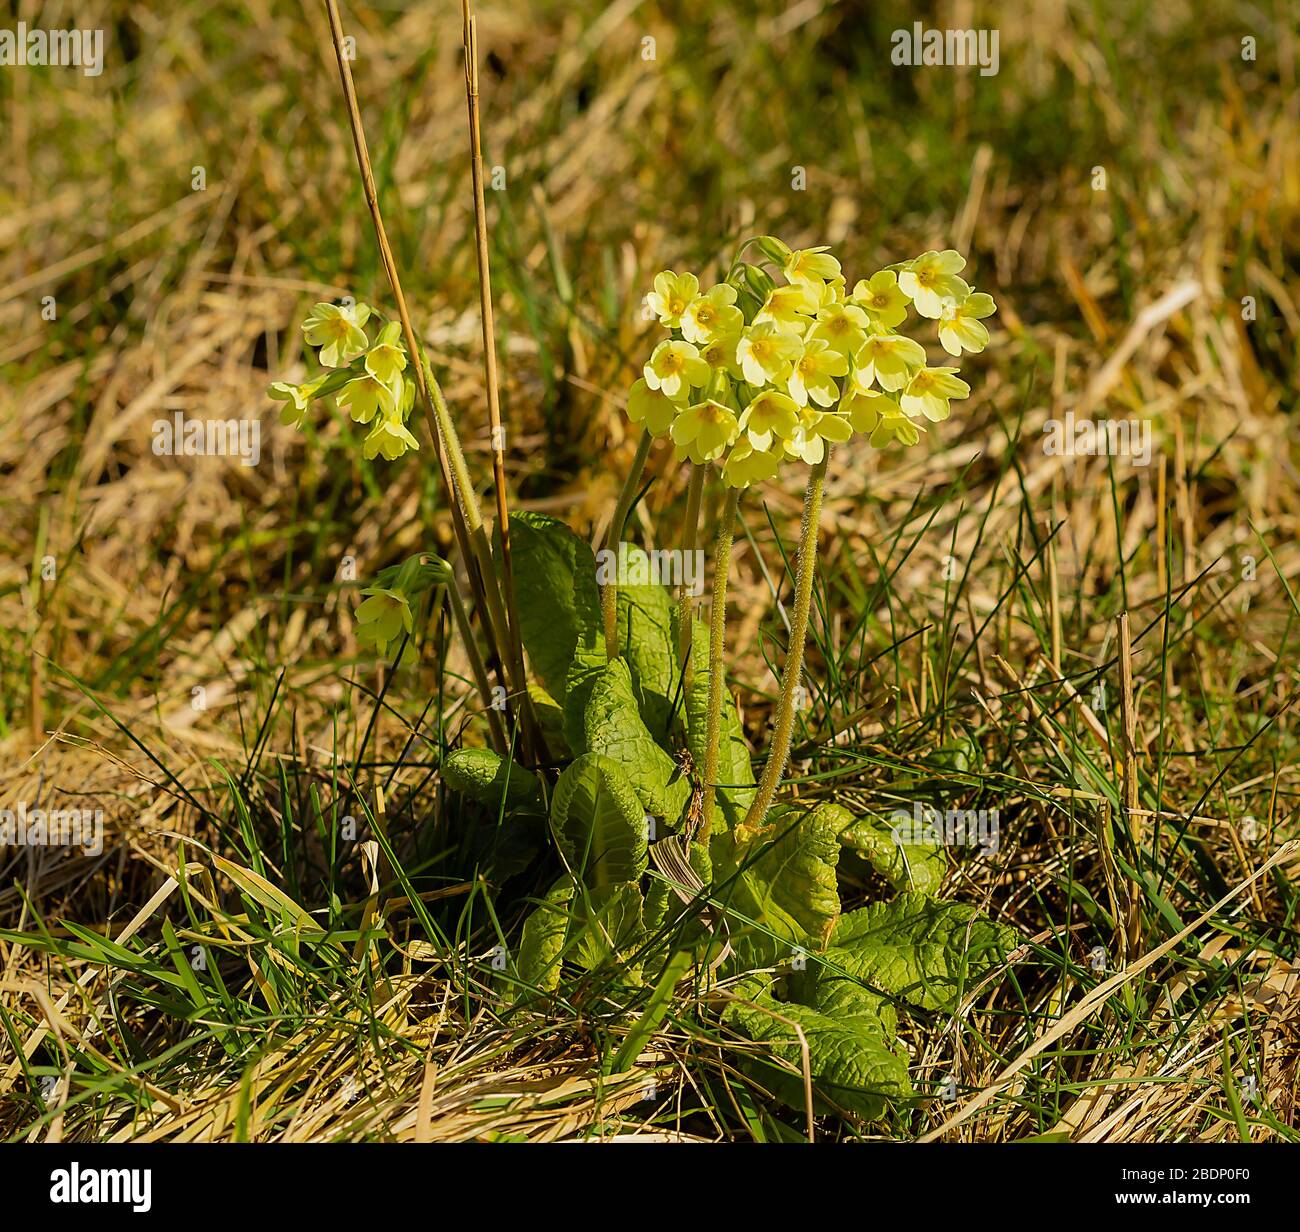 The wild primrose stretches its flower heads towards the sunlight. Stock Photo